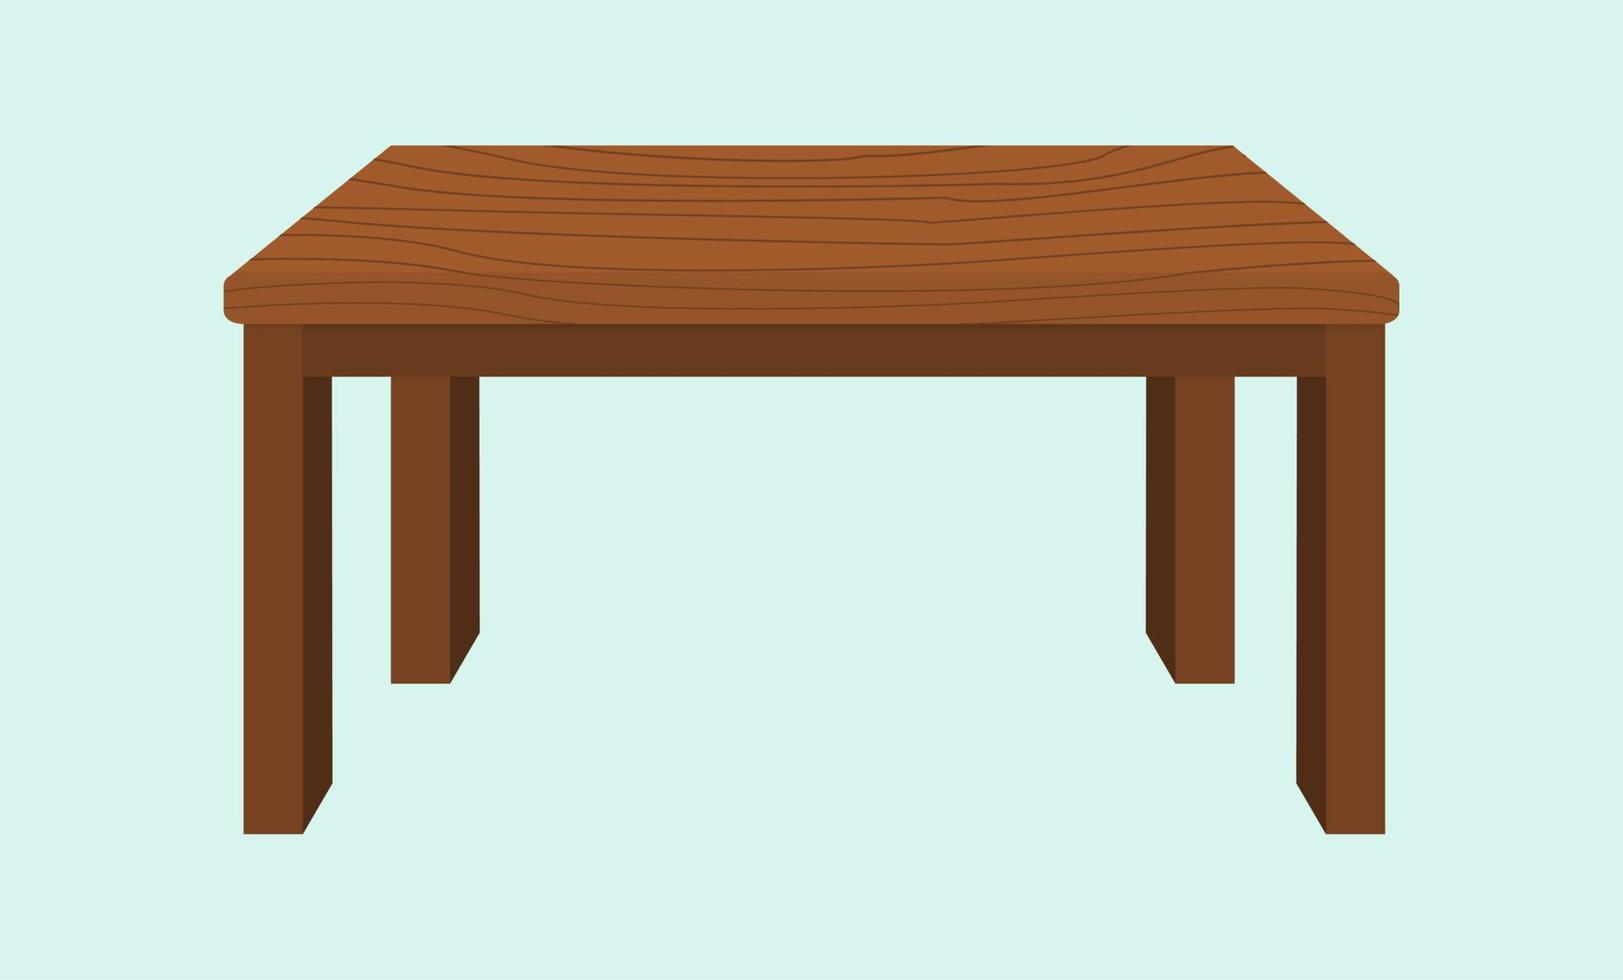 vector wood table top on isolated background Tables furniture of wood, interior wooden desks